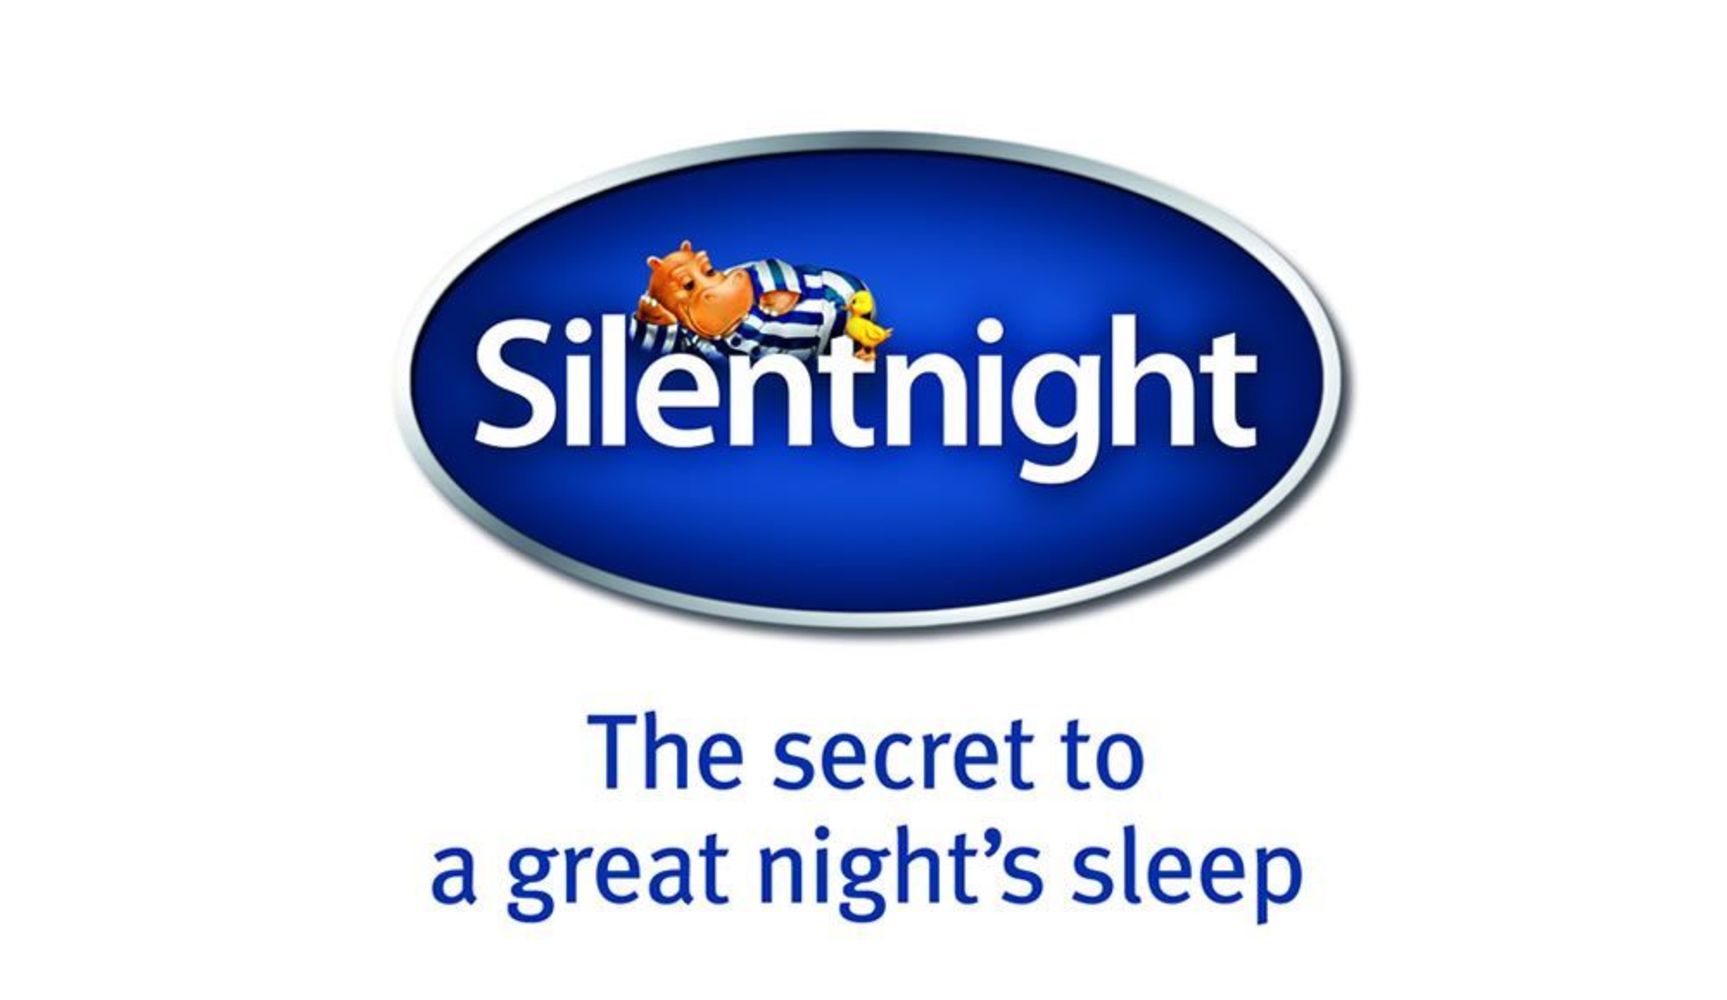 Silent Night Pillows and Duvets in Bulk and Single Lots